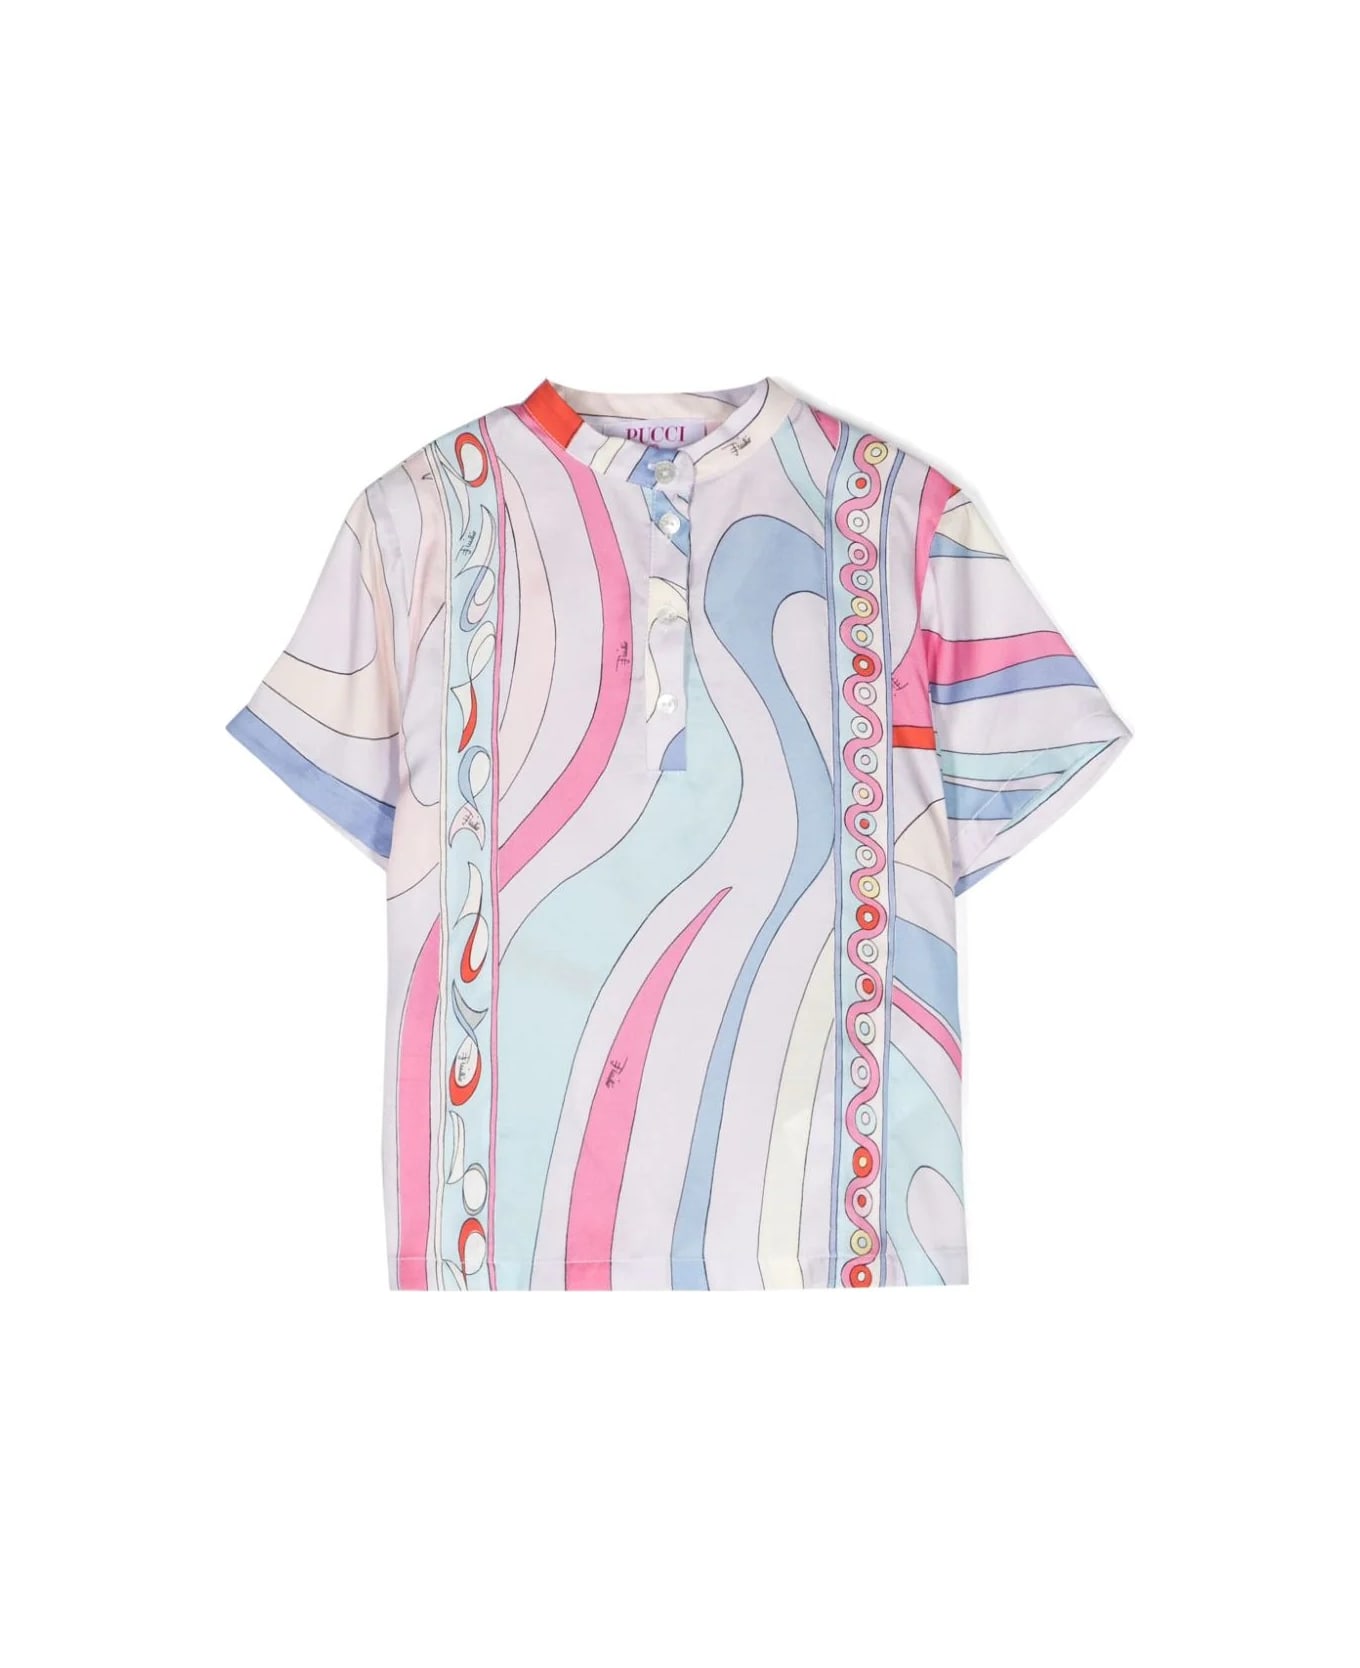 Pucci Short-sleeved Shirt With Light Blue/multicolour Iride Print - Blue